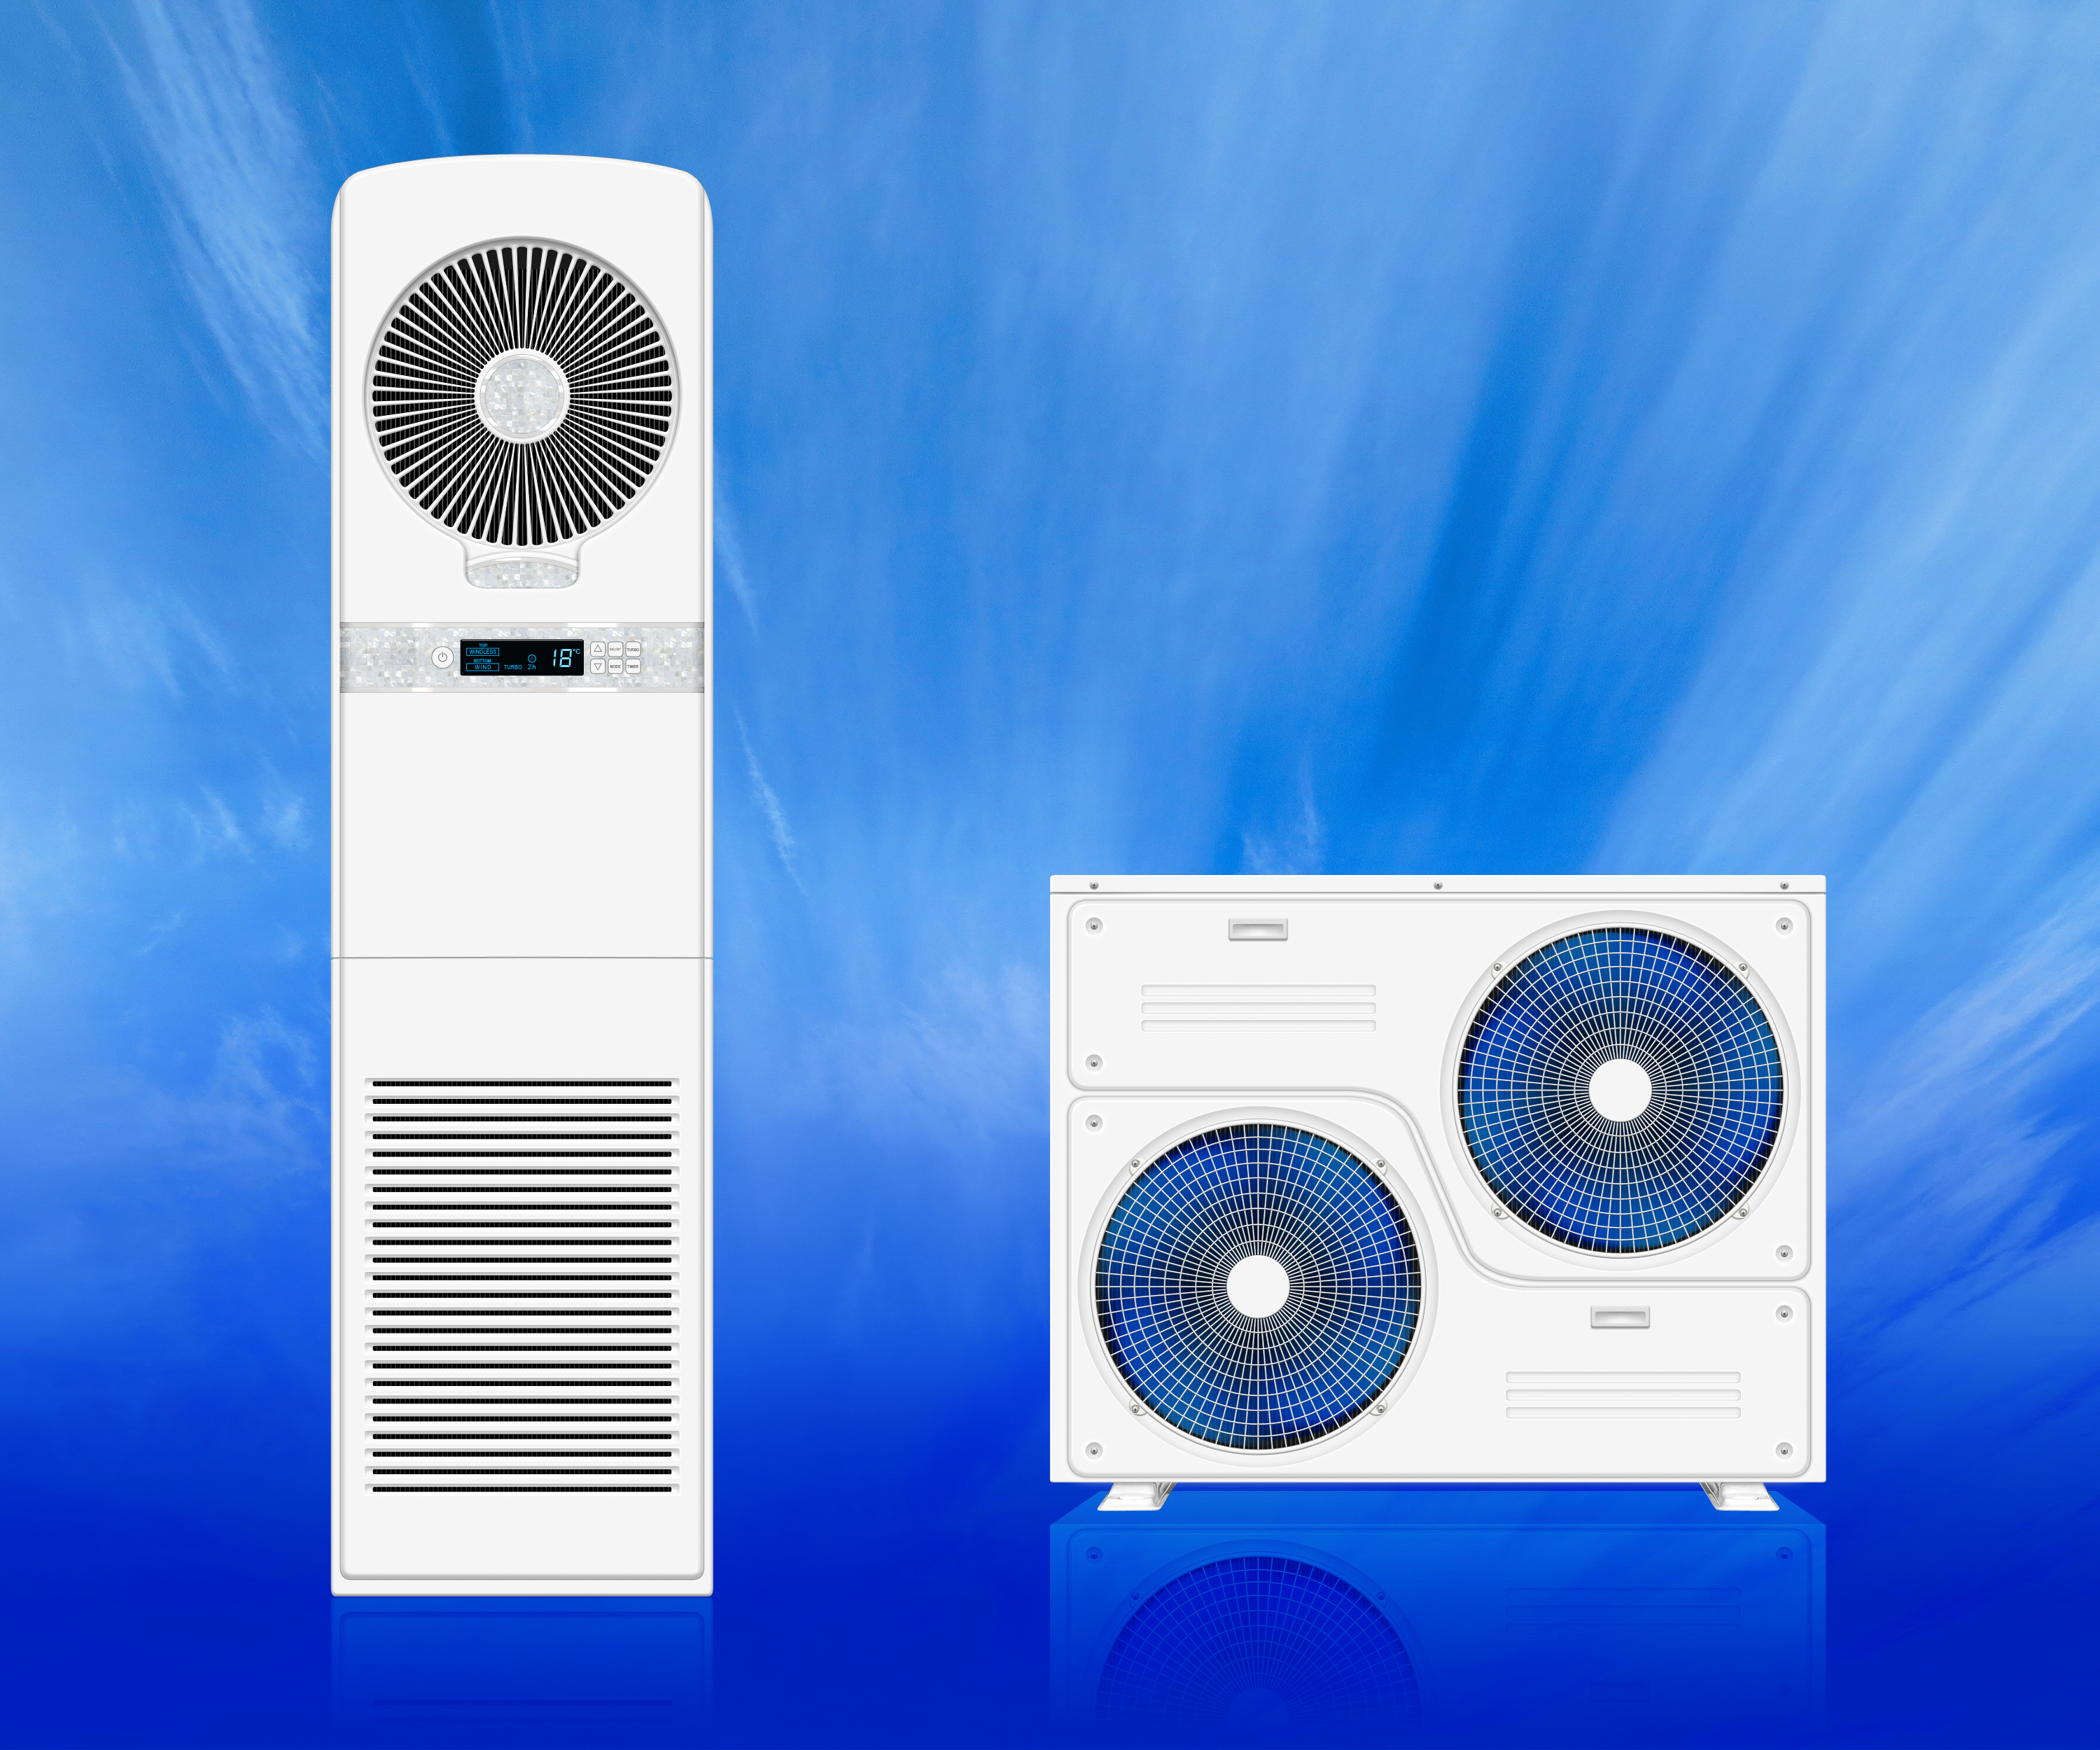 General 3000x2500 air conditioning CGI simple background